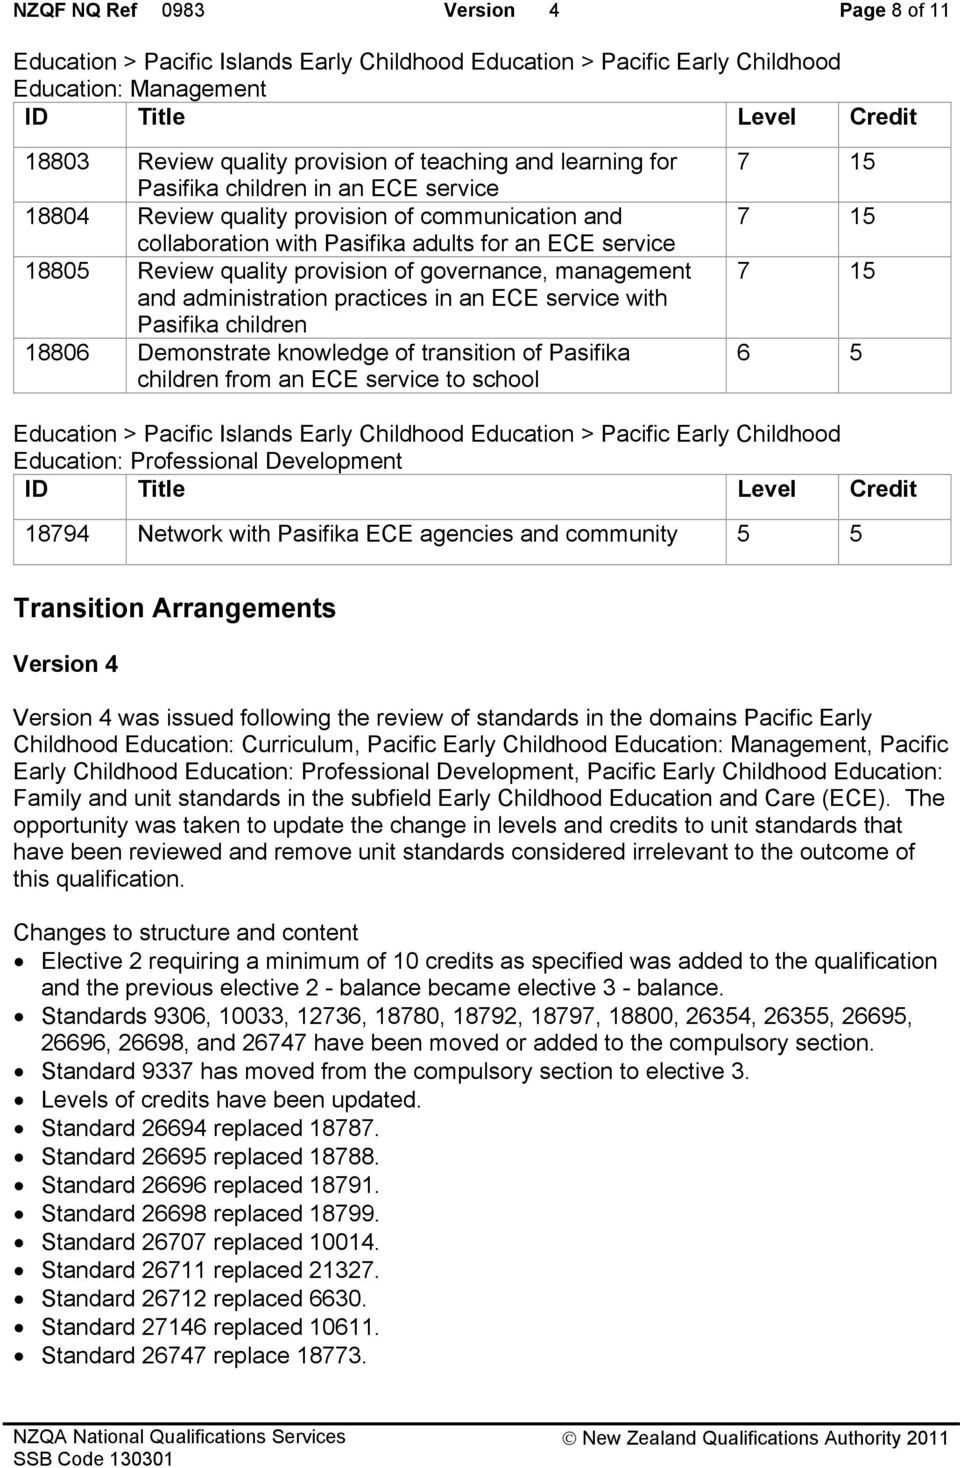 18806 Demonstrate knowledge of transition of Pasifika children from an ECE service to school 7 15 7 15 7 15 6 5 Education: Professional Development 18794 Network with Pasifika ECE agencies and